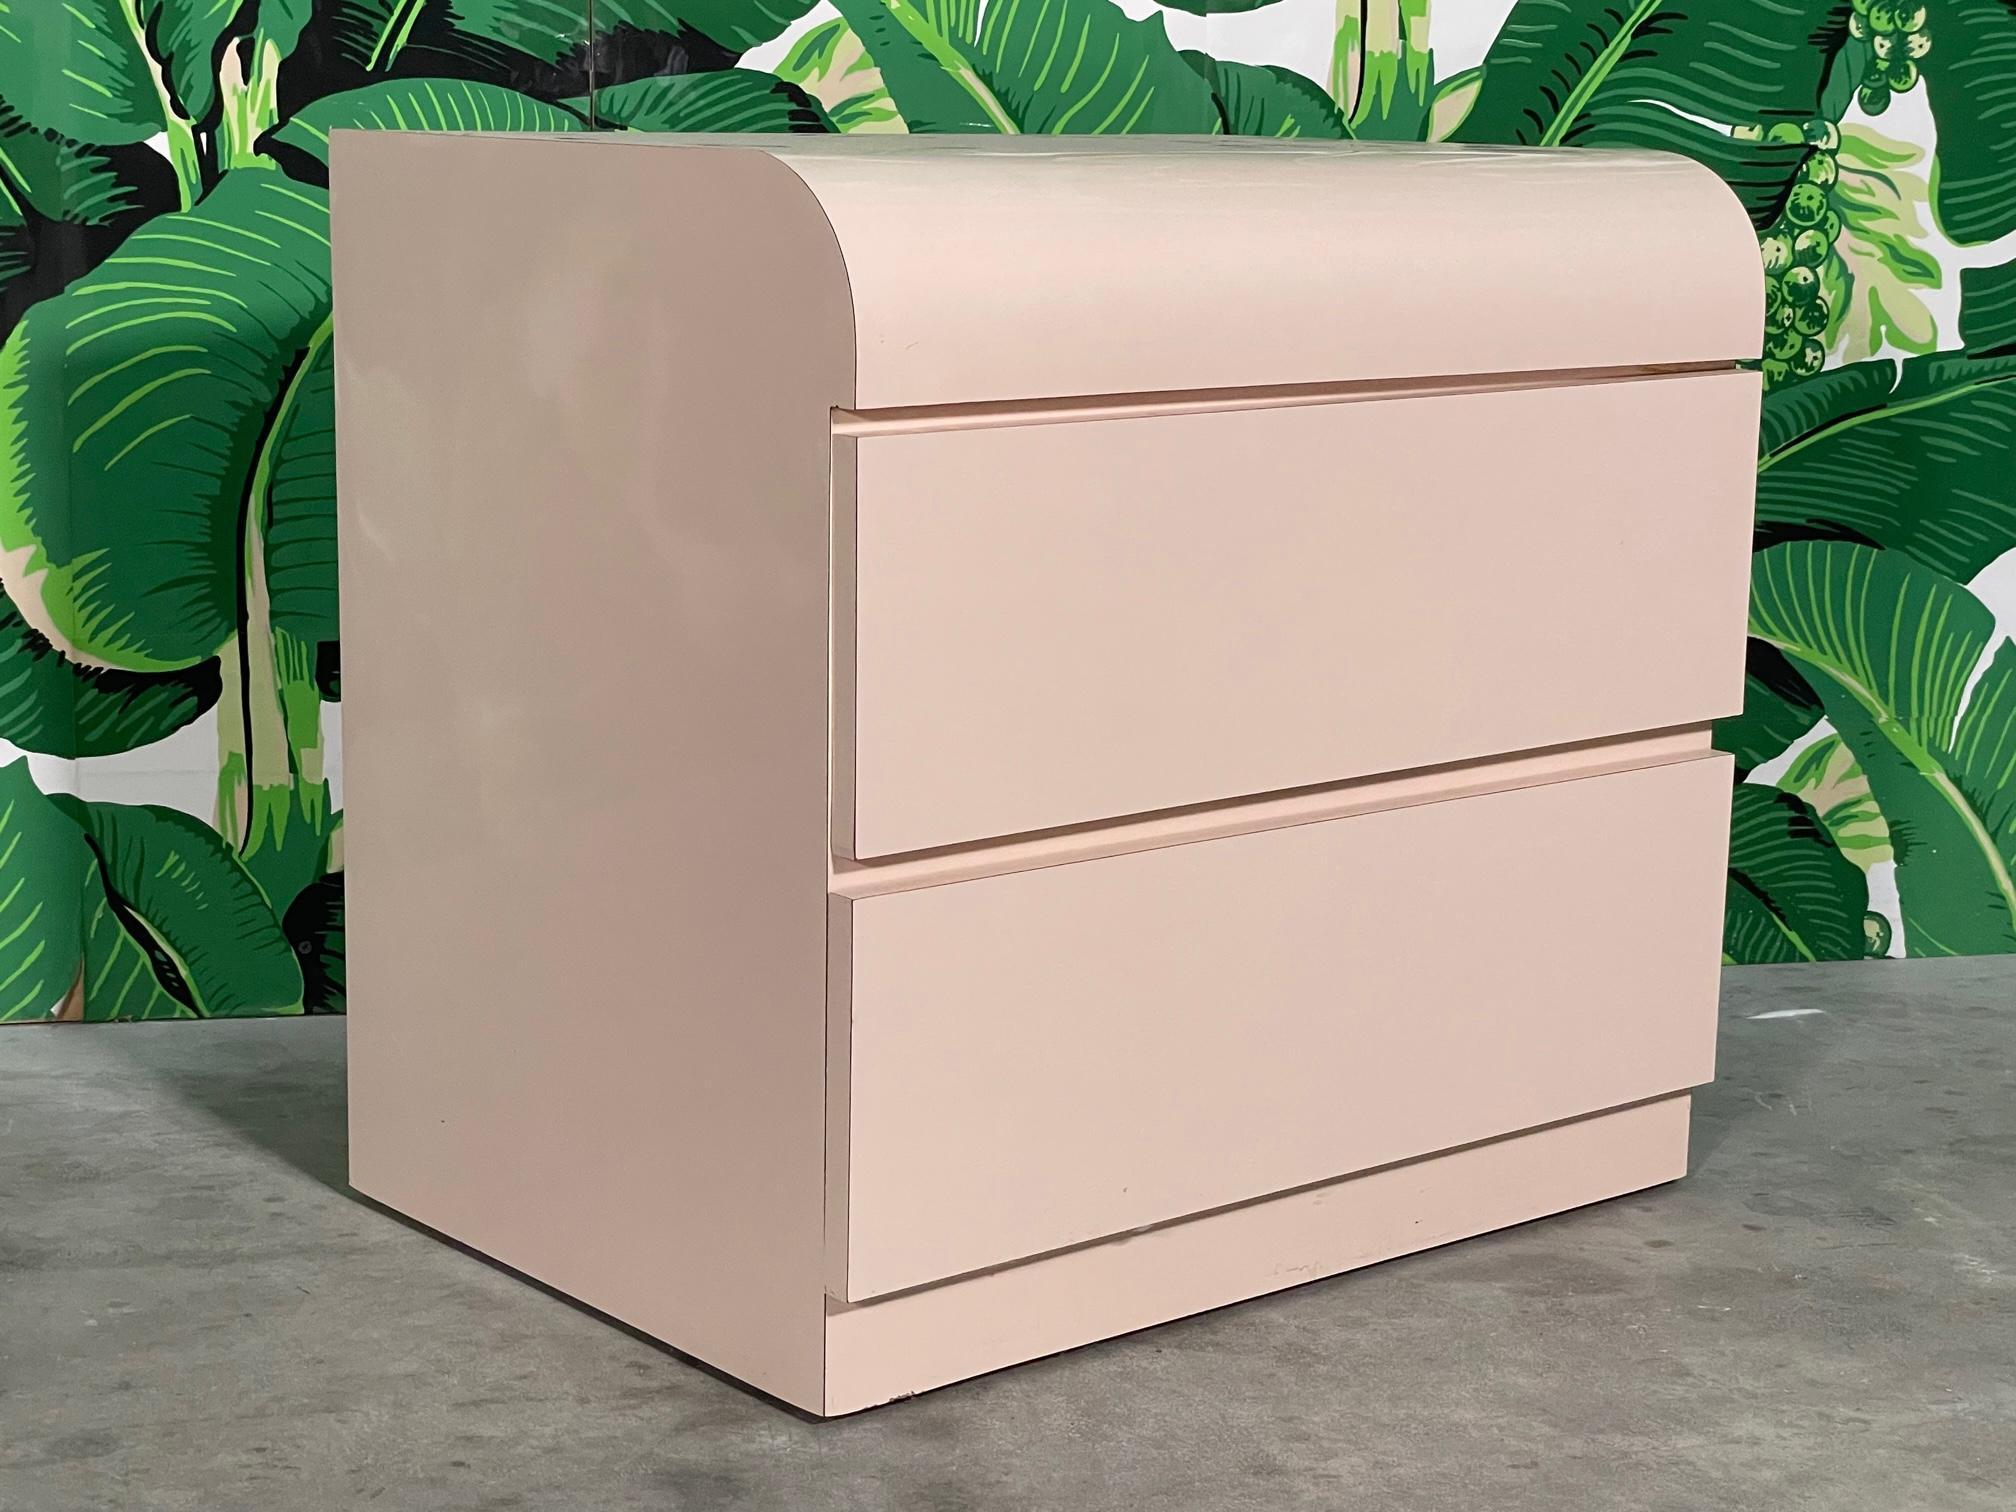 80s era nightstand features smooth waterfall front and a solid plinth style base. Styling reminiscent of Karl Springer. Good condition with minor imperfections and drawers operate like new. See photos for condition details. 

